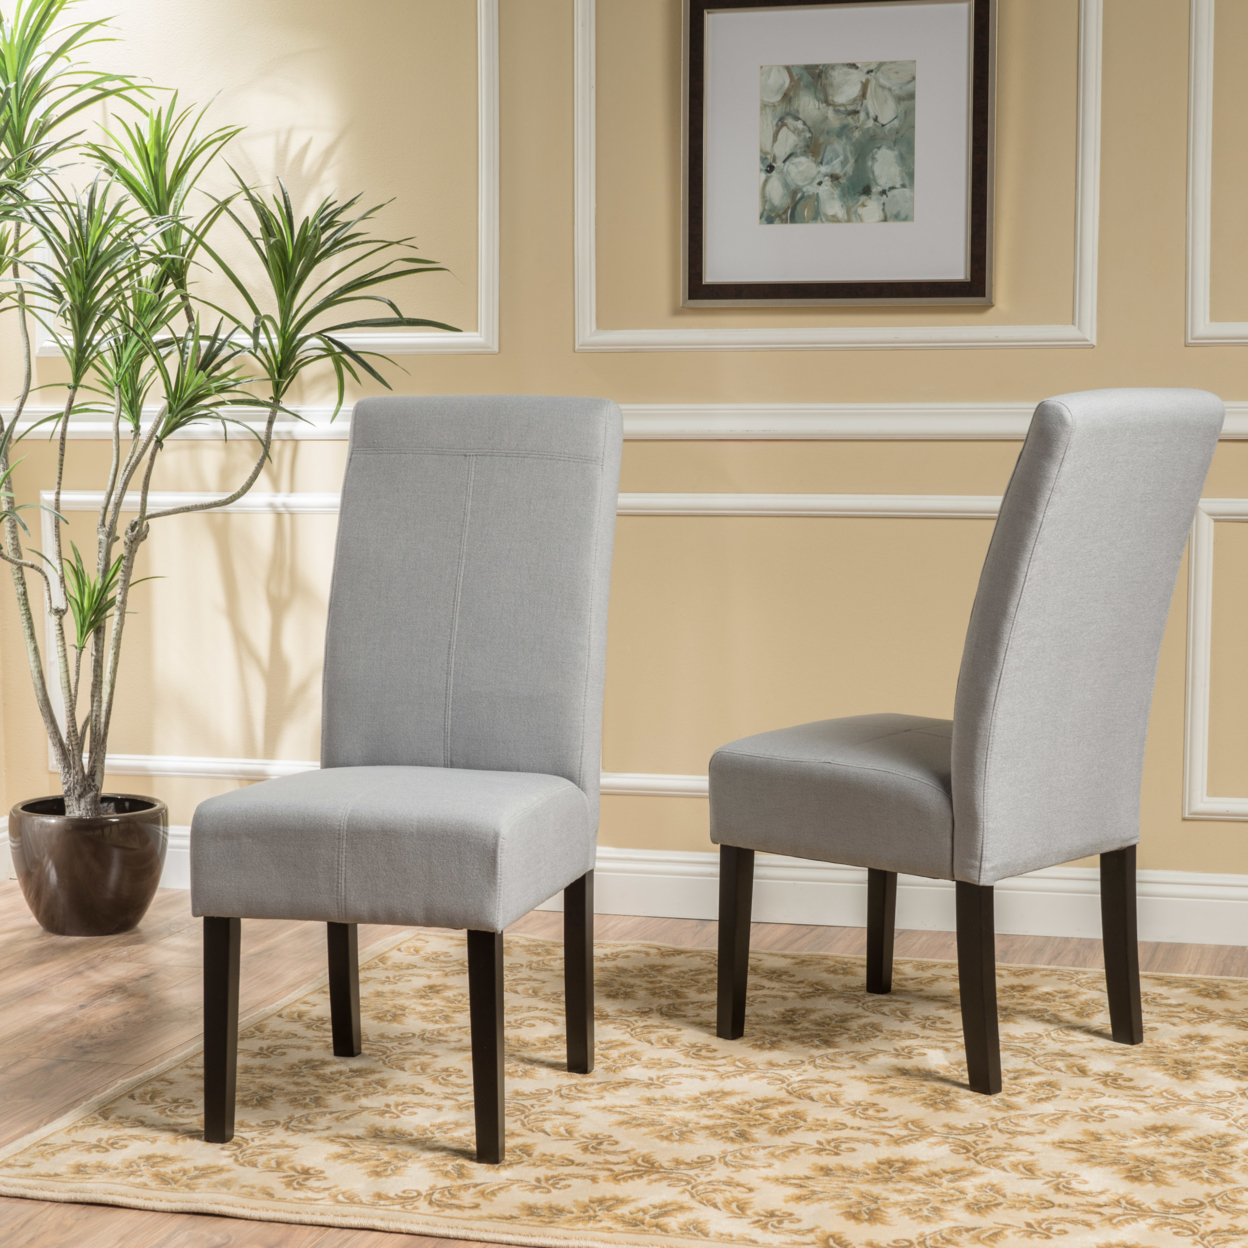 Lissa Contemporary T-Stitch Upholstered Dining Chairs (Set Of 2) - Light Grey, Fabric